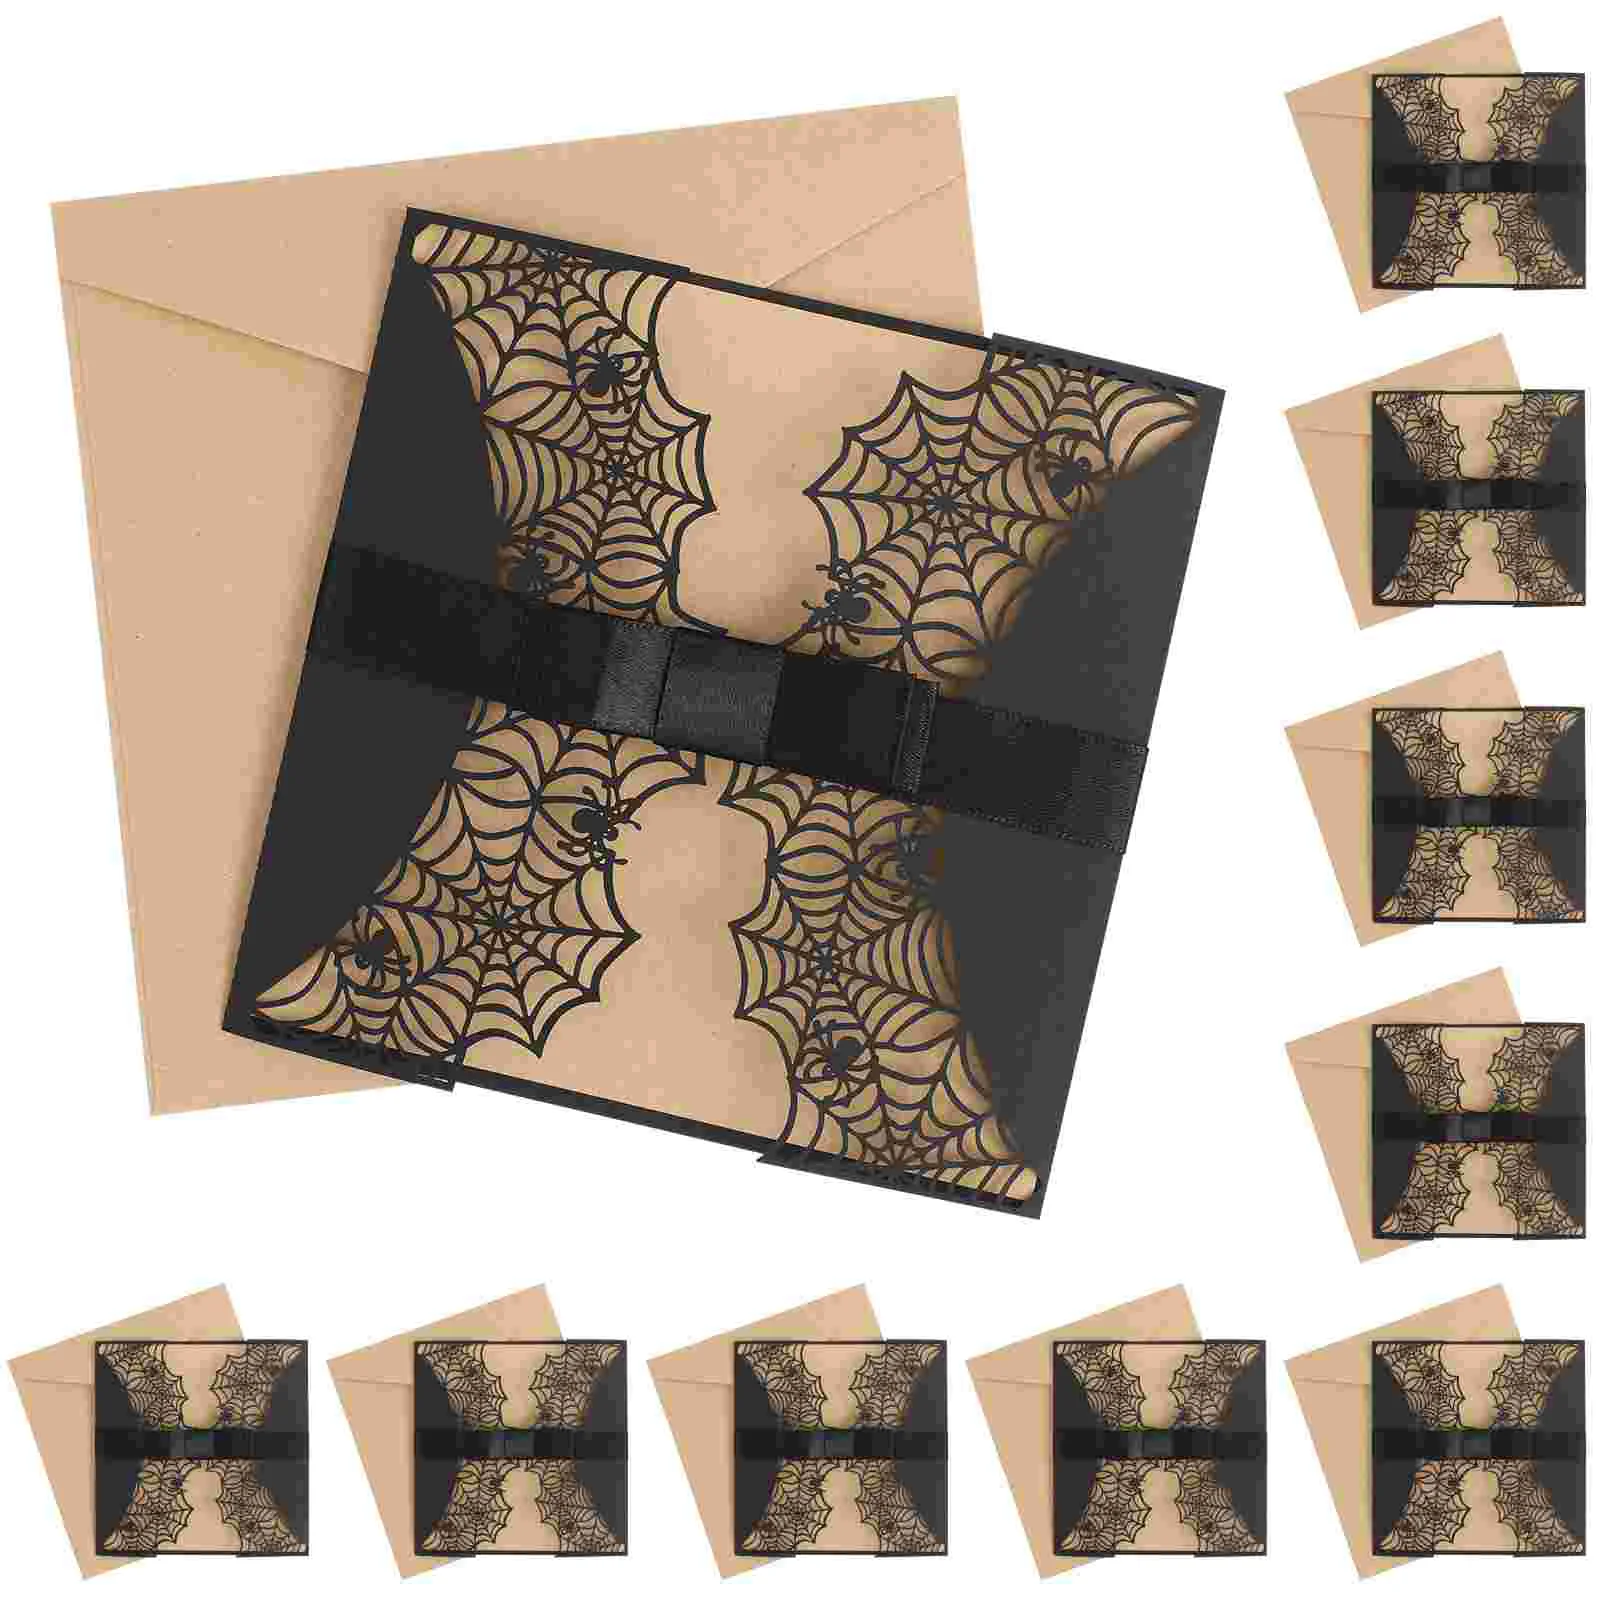 

10pcs Creative Cut Halloween Invitations Hollow Horror Party Invitations Cards Spiderweb Design Cards with Bowknots (Black)